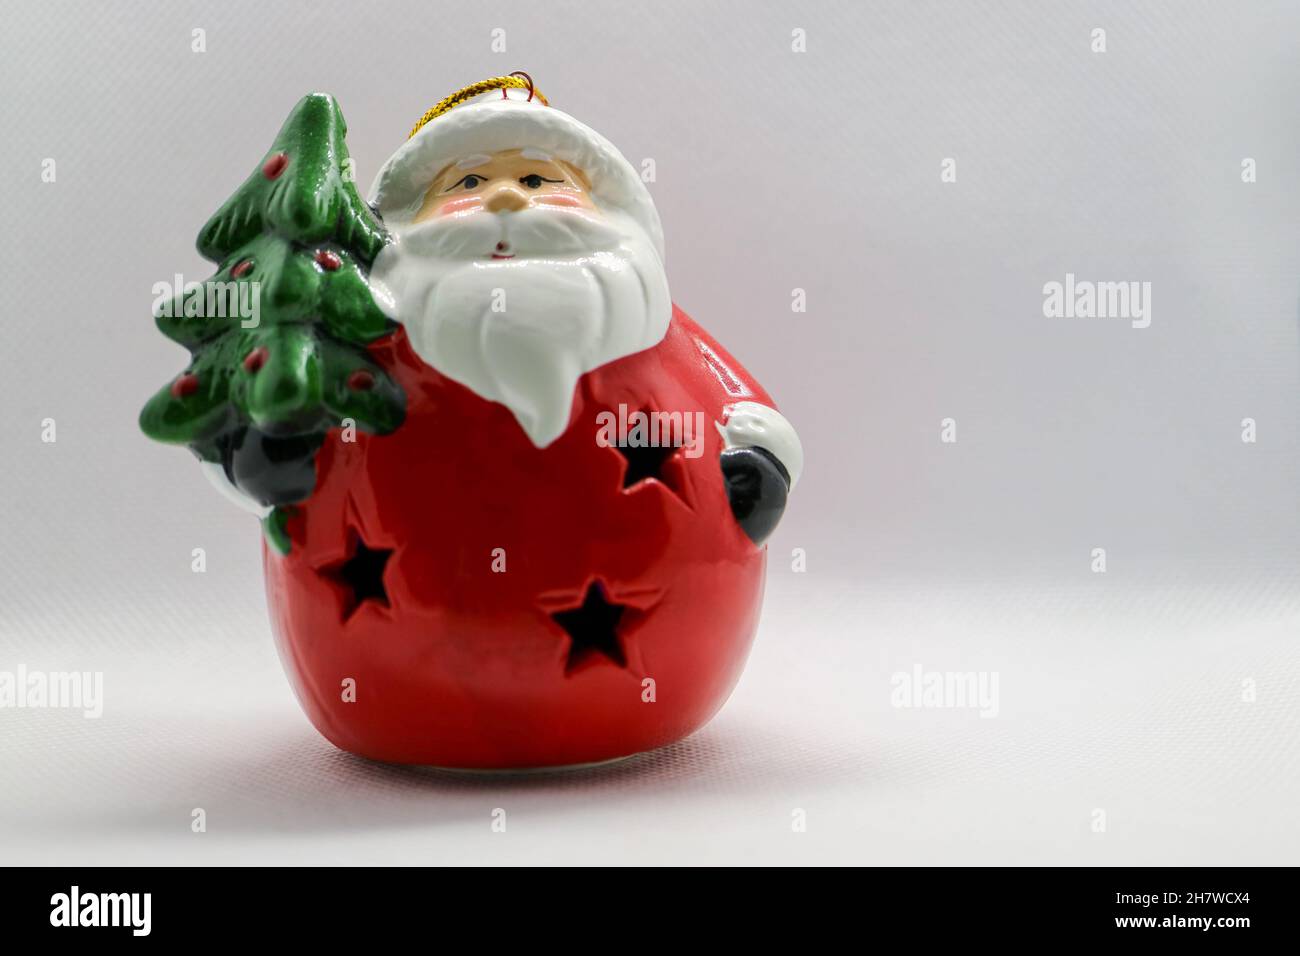 Santa Claus with red body, green Christmas tree, Santa Claus  ceramic figure on white background, Christmas  decoration, New Year card Stock Photo